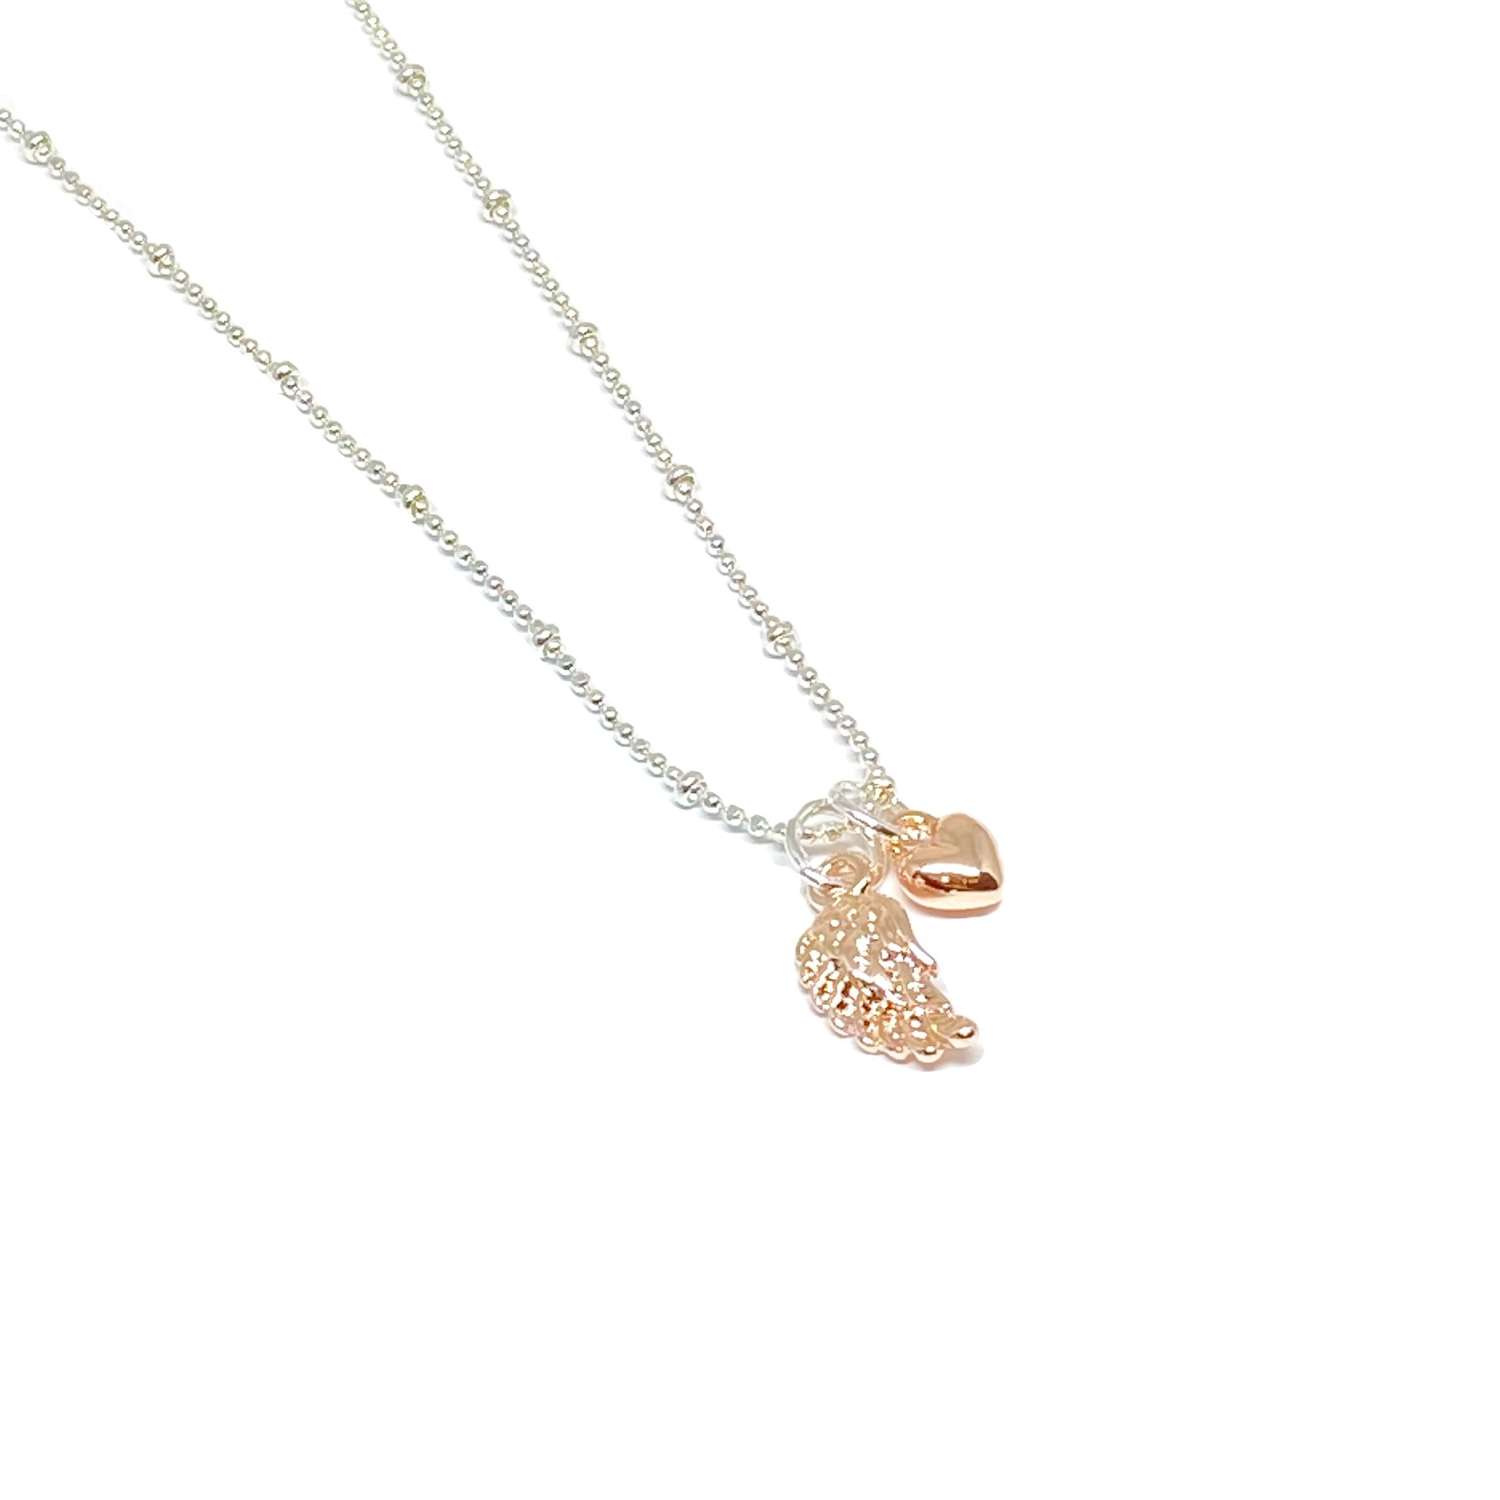 Sophia Angel Wing Necklace - Rose Gold